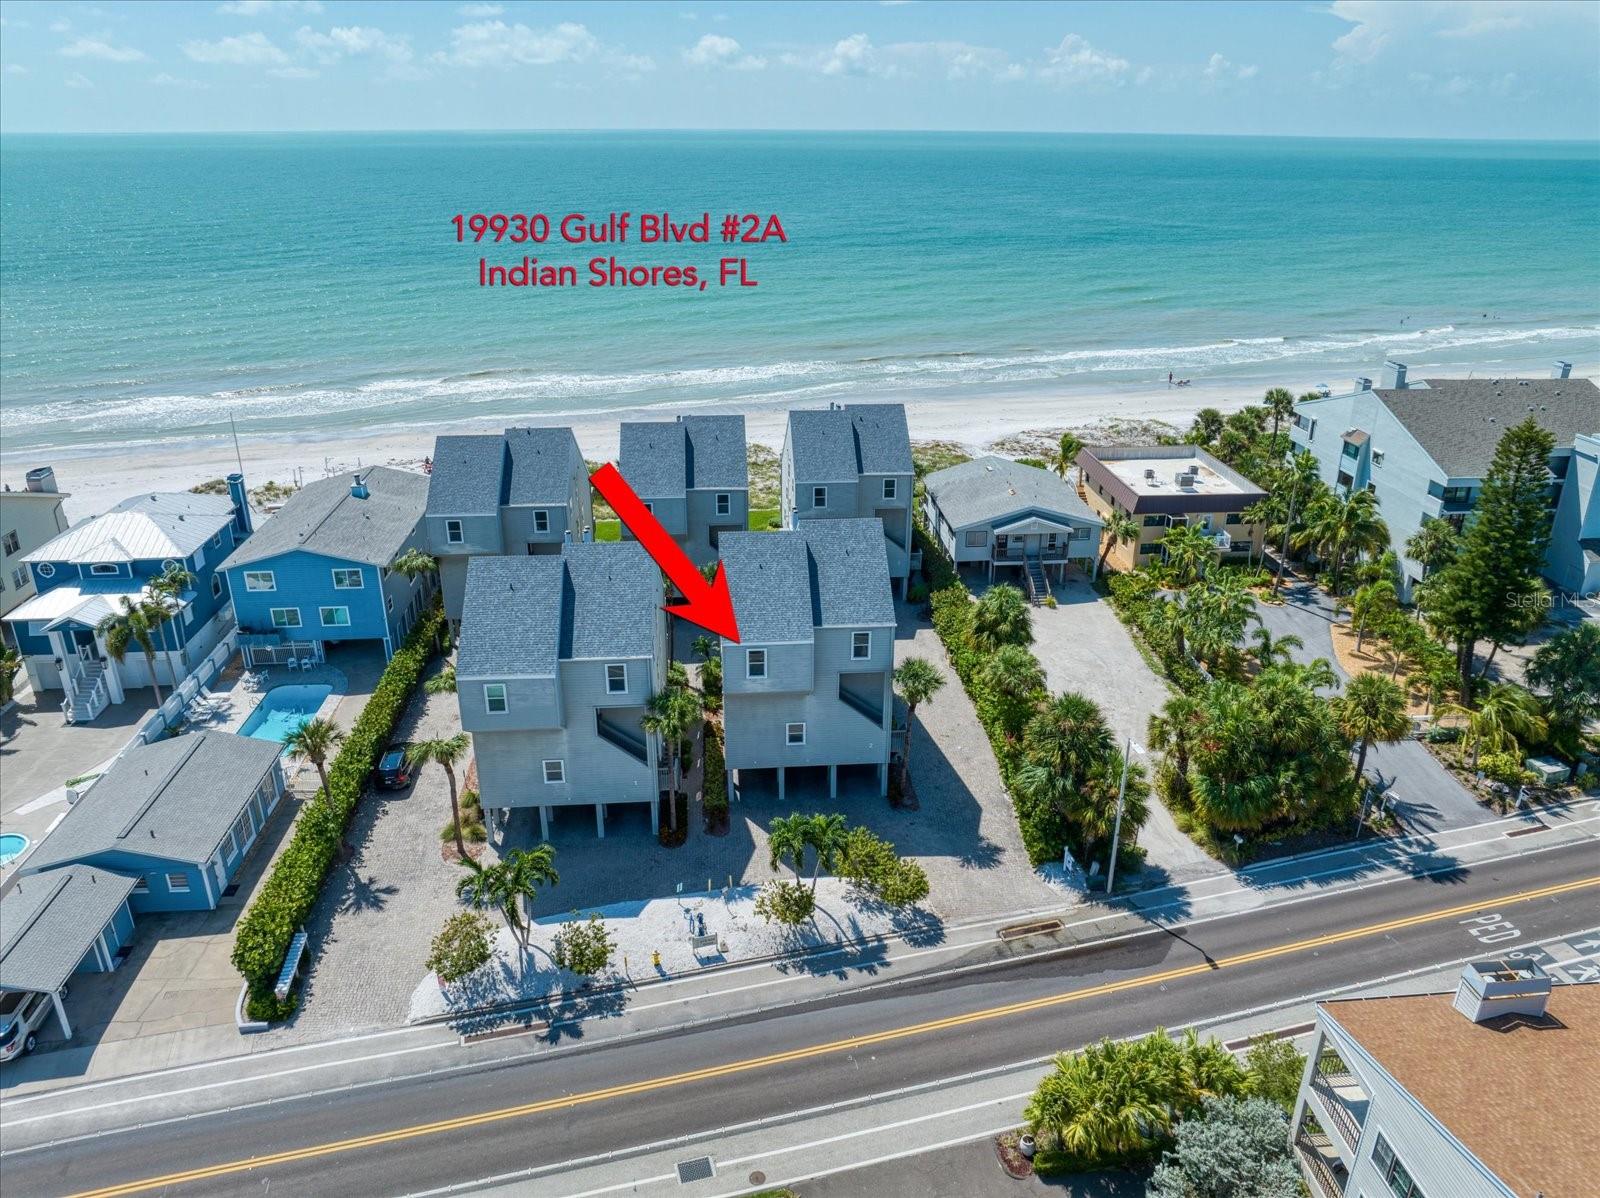 YOUR chance to own a slice of beach paradise